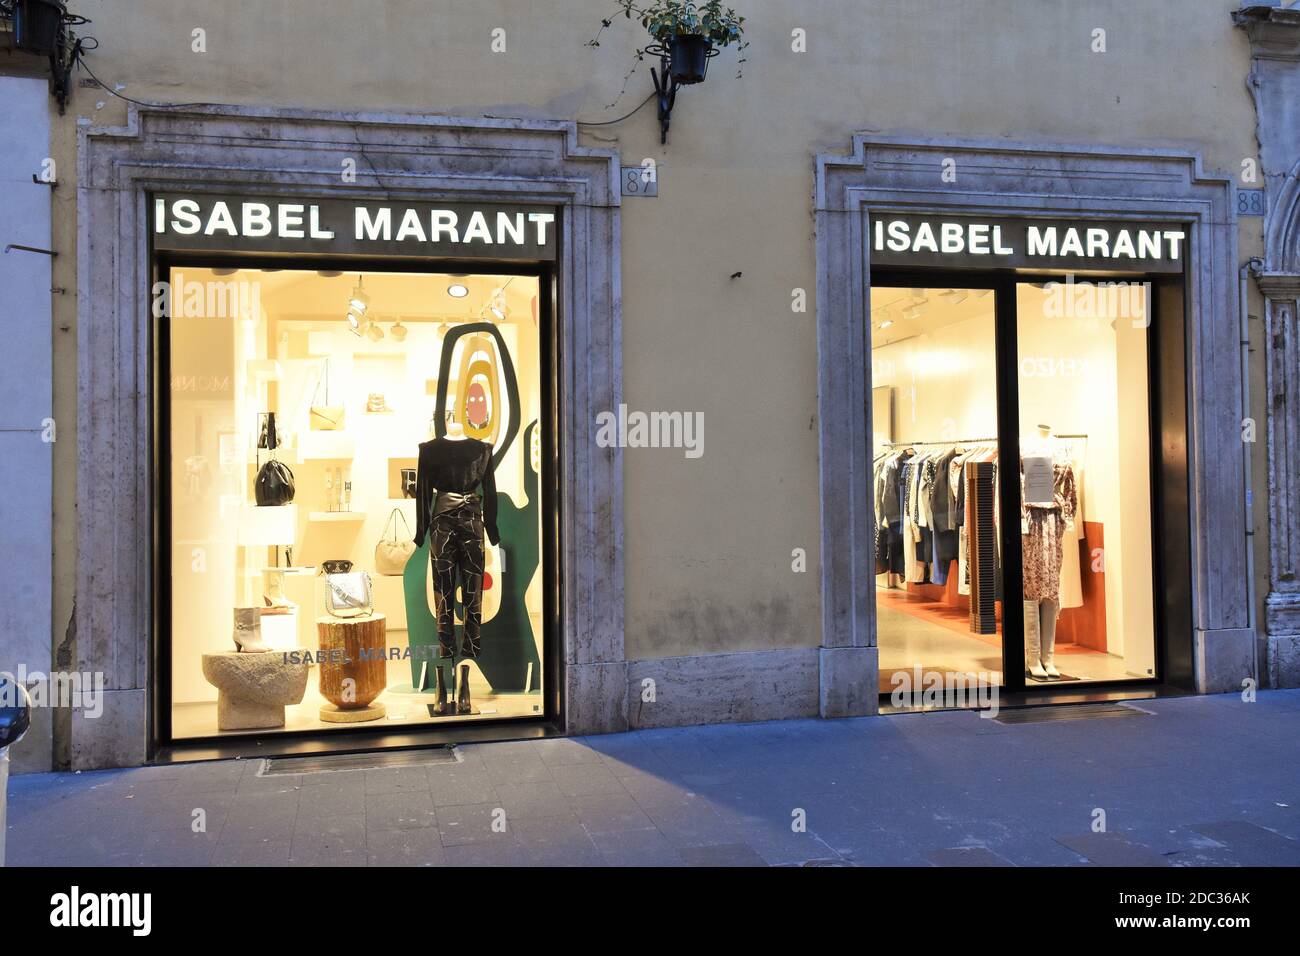 bang dekorere Vanding Isabel Marant High Resolution Stock Photography and Images - Alamy